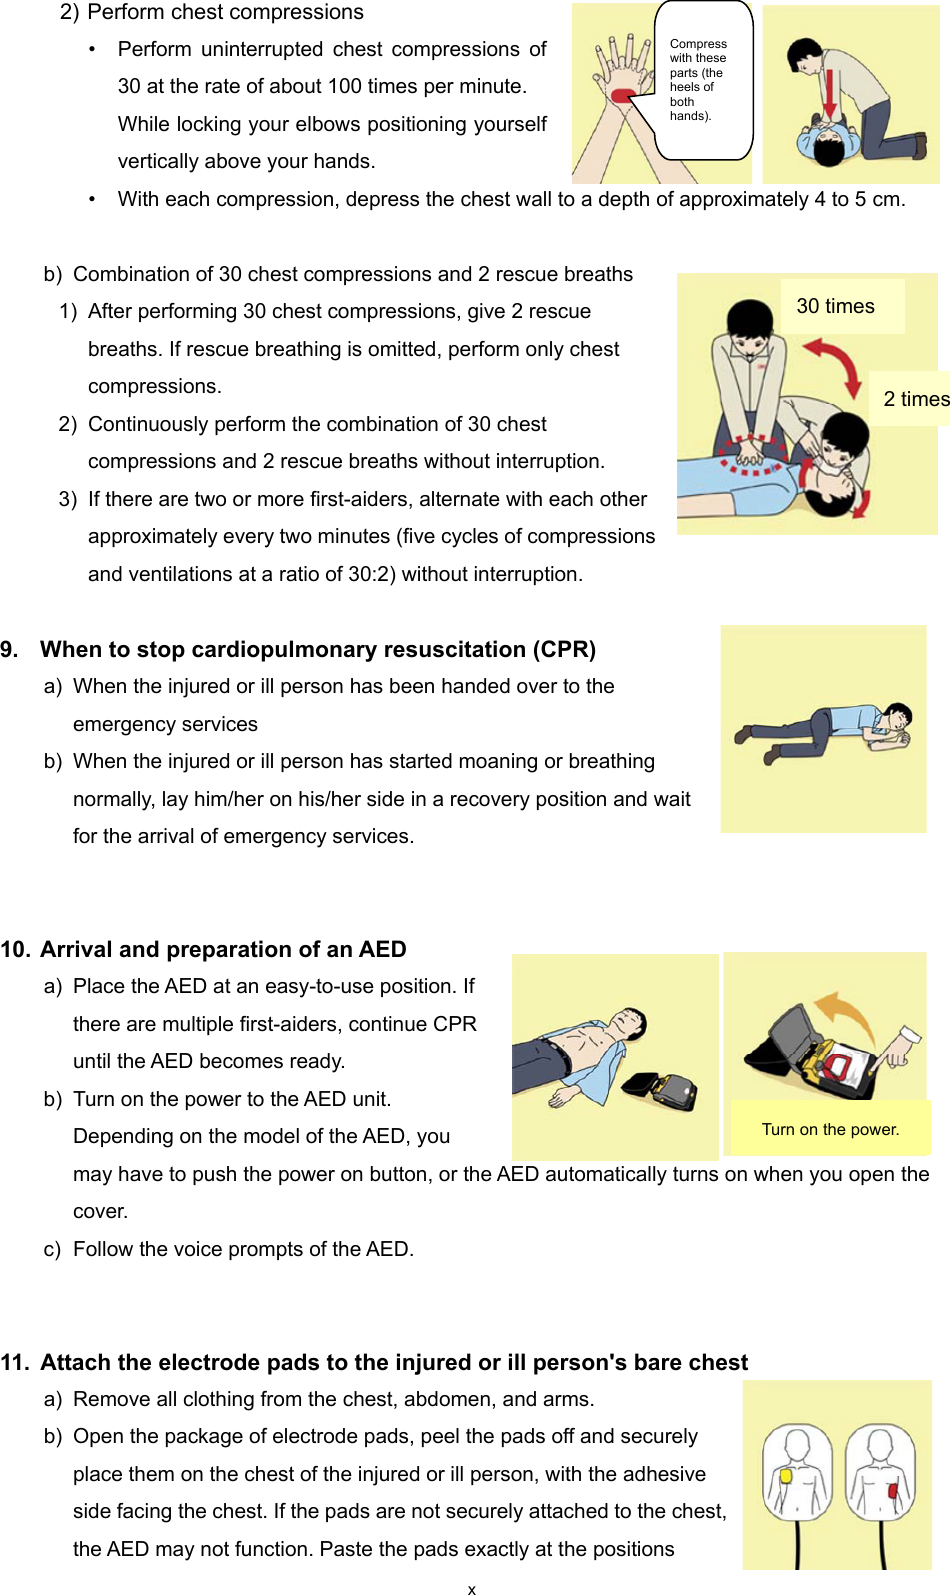 x 2) Perform chest compressions • Perform uninterrupted chest compressions of 30 at the rate of about 100 times per minute. While locking your elbows positioning yourself vertically above your hands. • With each compression, depress the chest wall to a depth of approximately 4 to 5 cm.  b) Combination of 30 chest compressions and 2 rescue breaths 1) After performing 30 chest compressions, give 2 rescue breaths. If rescue breathing is omitted, perform only chest compressions. 2) Continuously perform the combination of 30 chest compressions and 2 rescue breaths without interruption. 3) If there are two or more first-aiders, alternate with each other approximately every two minutes (five cycles of compressions and ventilations at a ratio of 30:2) without interruption.  9.  When to stop cardiopulmonary resuscitation (CPR) a) When the injured or ill person has been handed over to the emergency services b) When the injured or ill person has started moaning or breathing normally, lay him/her on his/her side in a recovery position and wait for the arrival of emergency services.   10. Arrival and preparation of an AED a) Place the AED at an easy-to-use position. If there are multiple first-aiders, continue CPR until the AED becomes ready. b) Turn on the power to the AED unit. Depending on the model of the AED, you may have to push the power on button, or the AED automatically turns on when you open the cover. c) Follow the voice prompts of the AED.   11.  Attach the electrode pads to the injured or ill person&apos;s bare chest   a) Remove all clothing from the chest, abdomen, and arms.   b) Open the package of electrode pads, peel the pads off and securely place them on the chest of the injured or ill person, with the adhesive side facing the chest. If the pads are not securely attached to the chest, the AED may not function. Paste the pads exactly at the positions 30 times Compress with these parts (the heels of both hands). 2 times Turn on the power. 